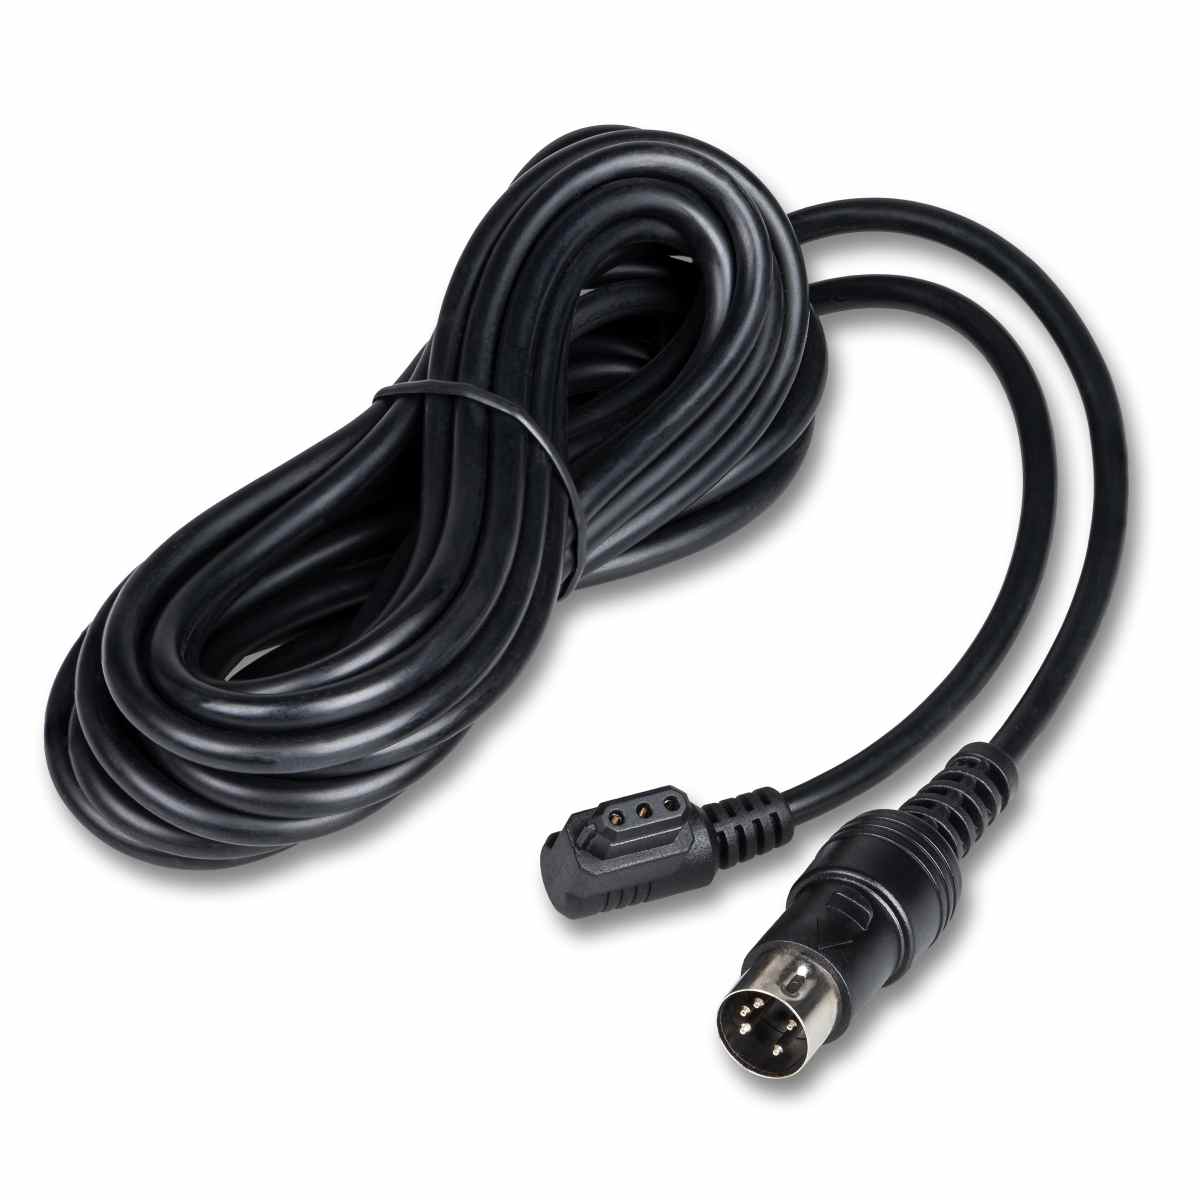 Walimex pro Flash Cable 5 meter for Lightshooter